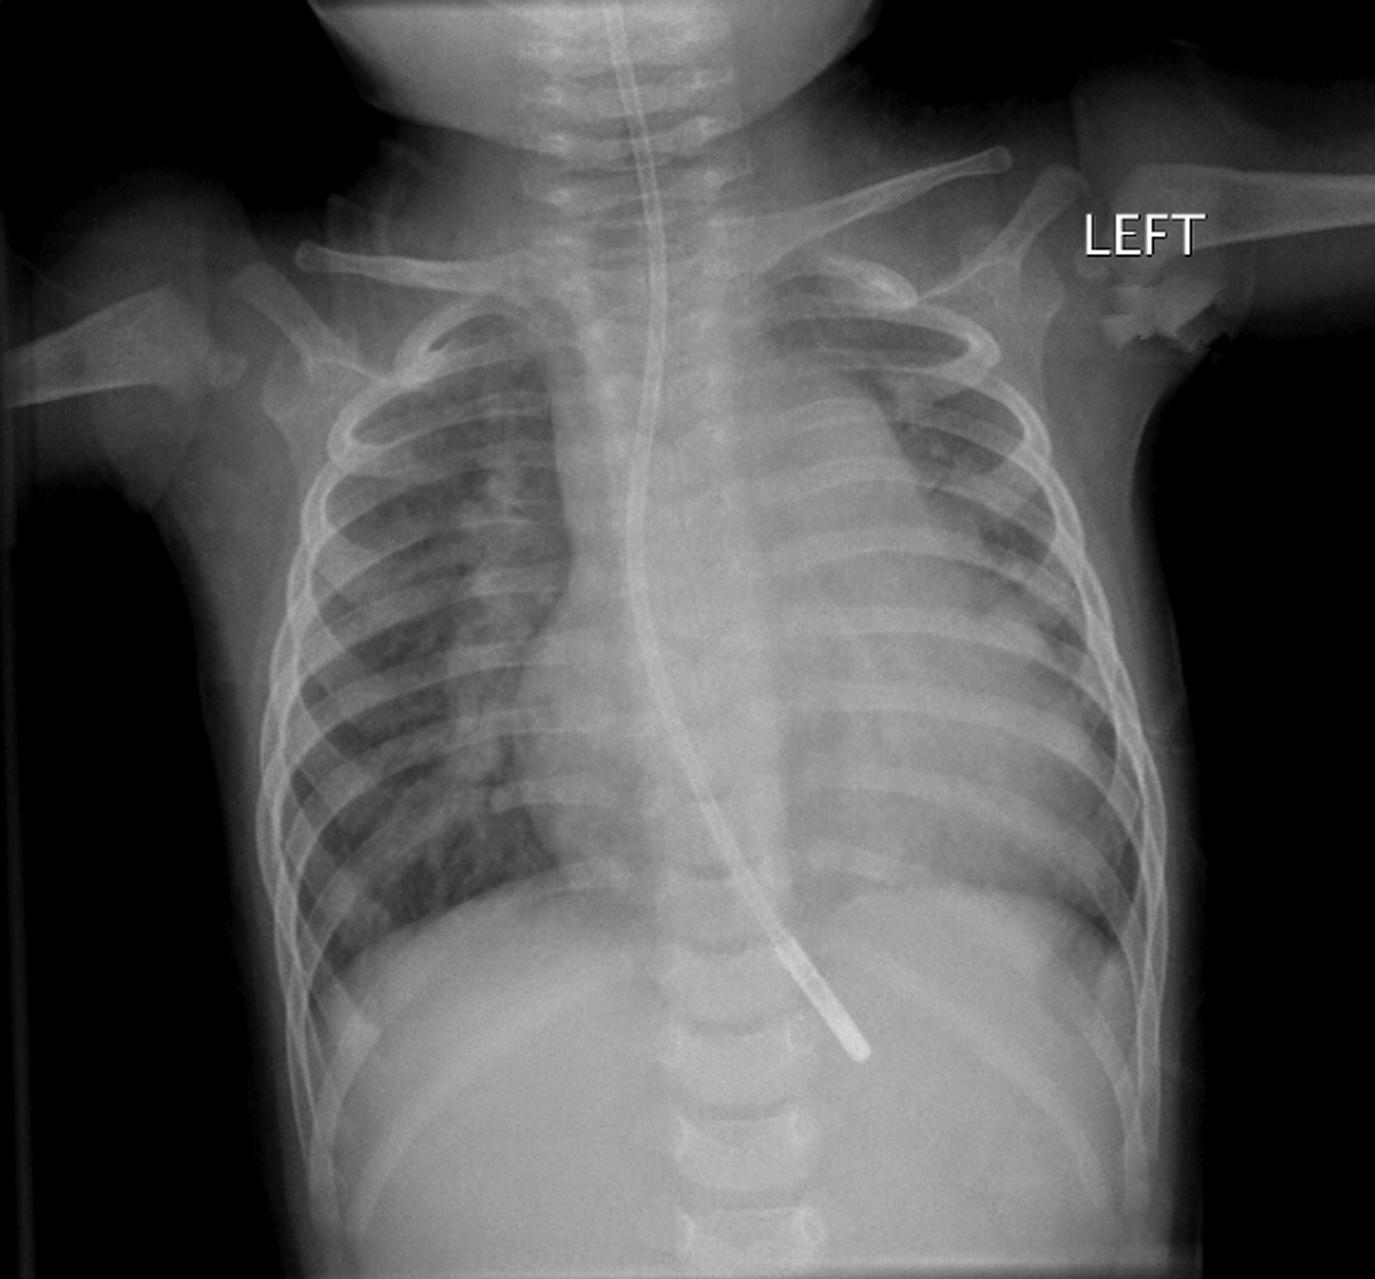 Figure 4-4, Frontal chest radiograph in a child with a perimembranous ventricular septal defect shows shunt vascularity with increased number and size of visible pulmonary arteries. Cardiomegaly is present as well.